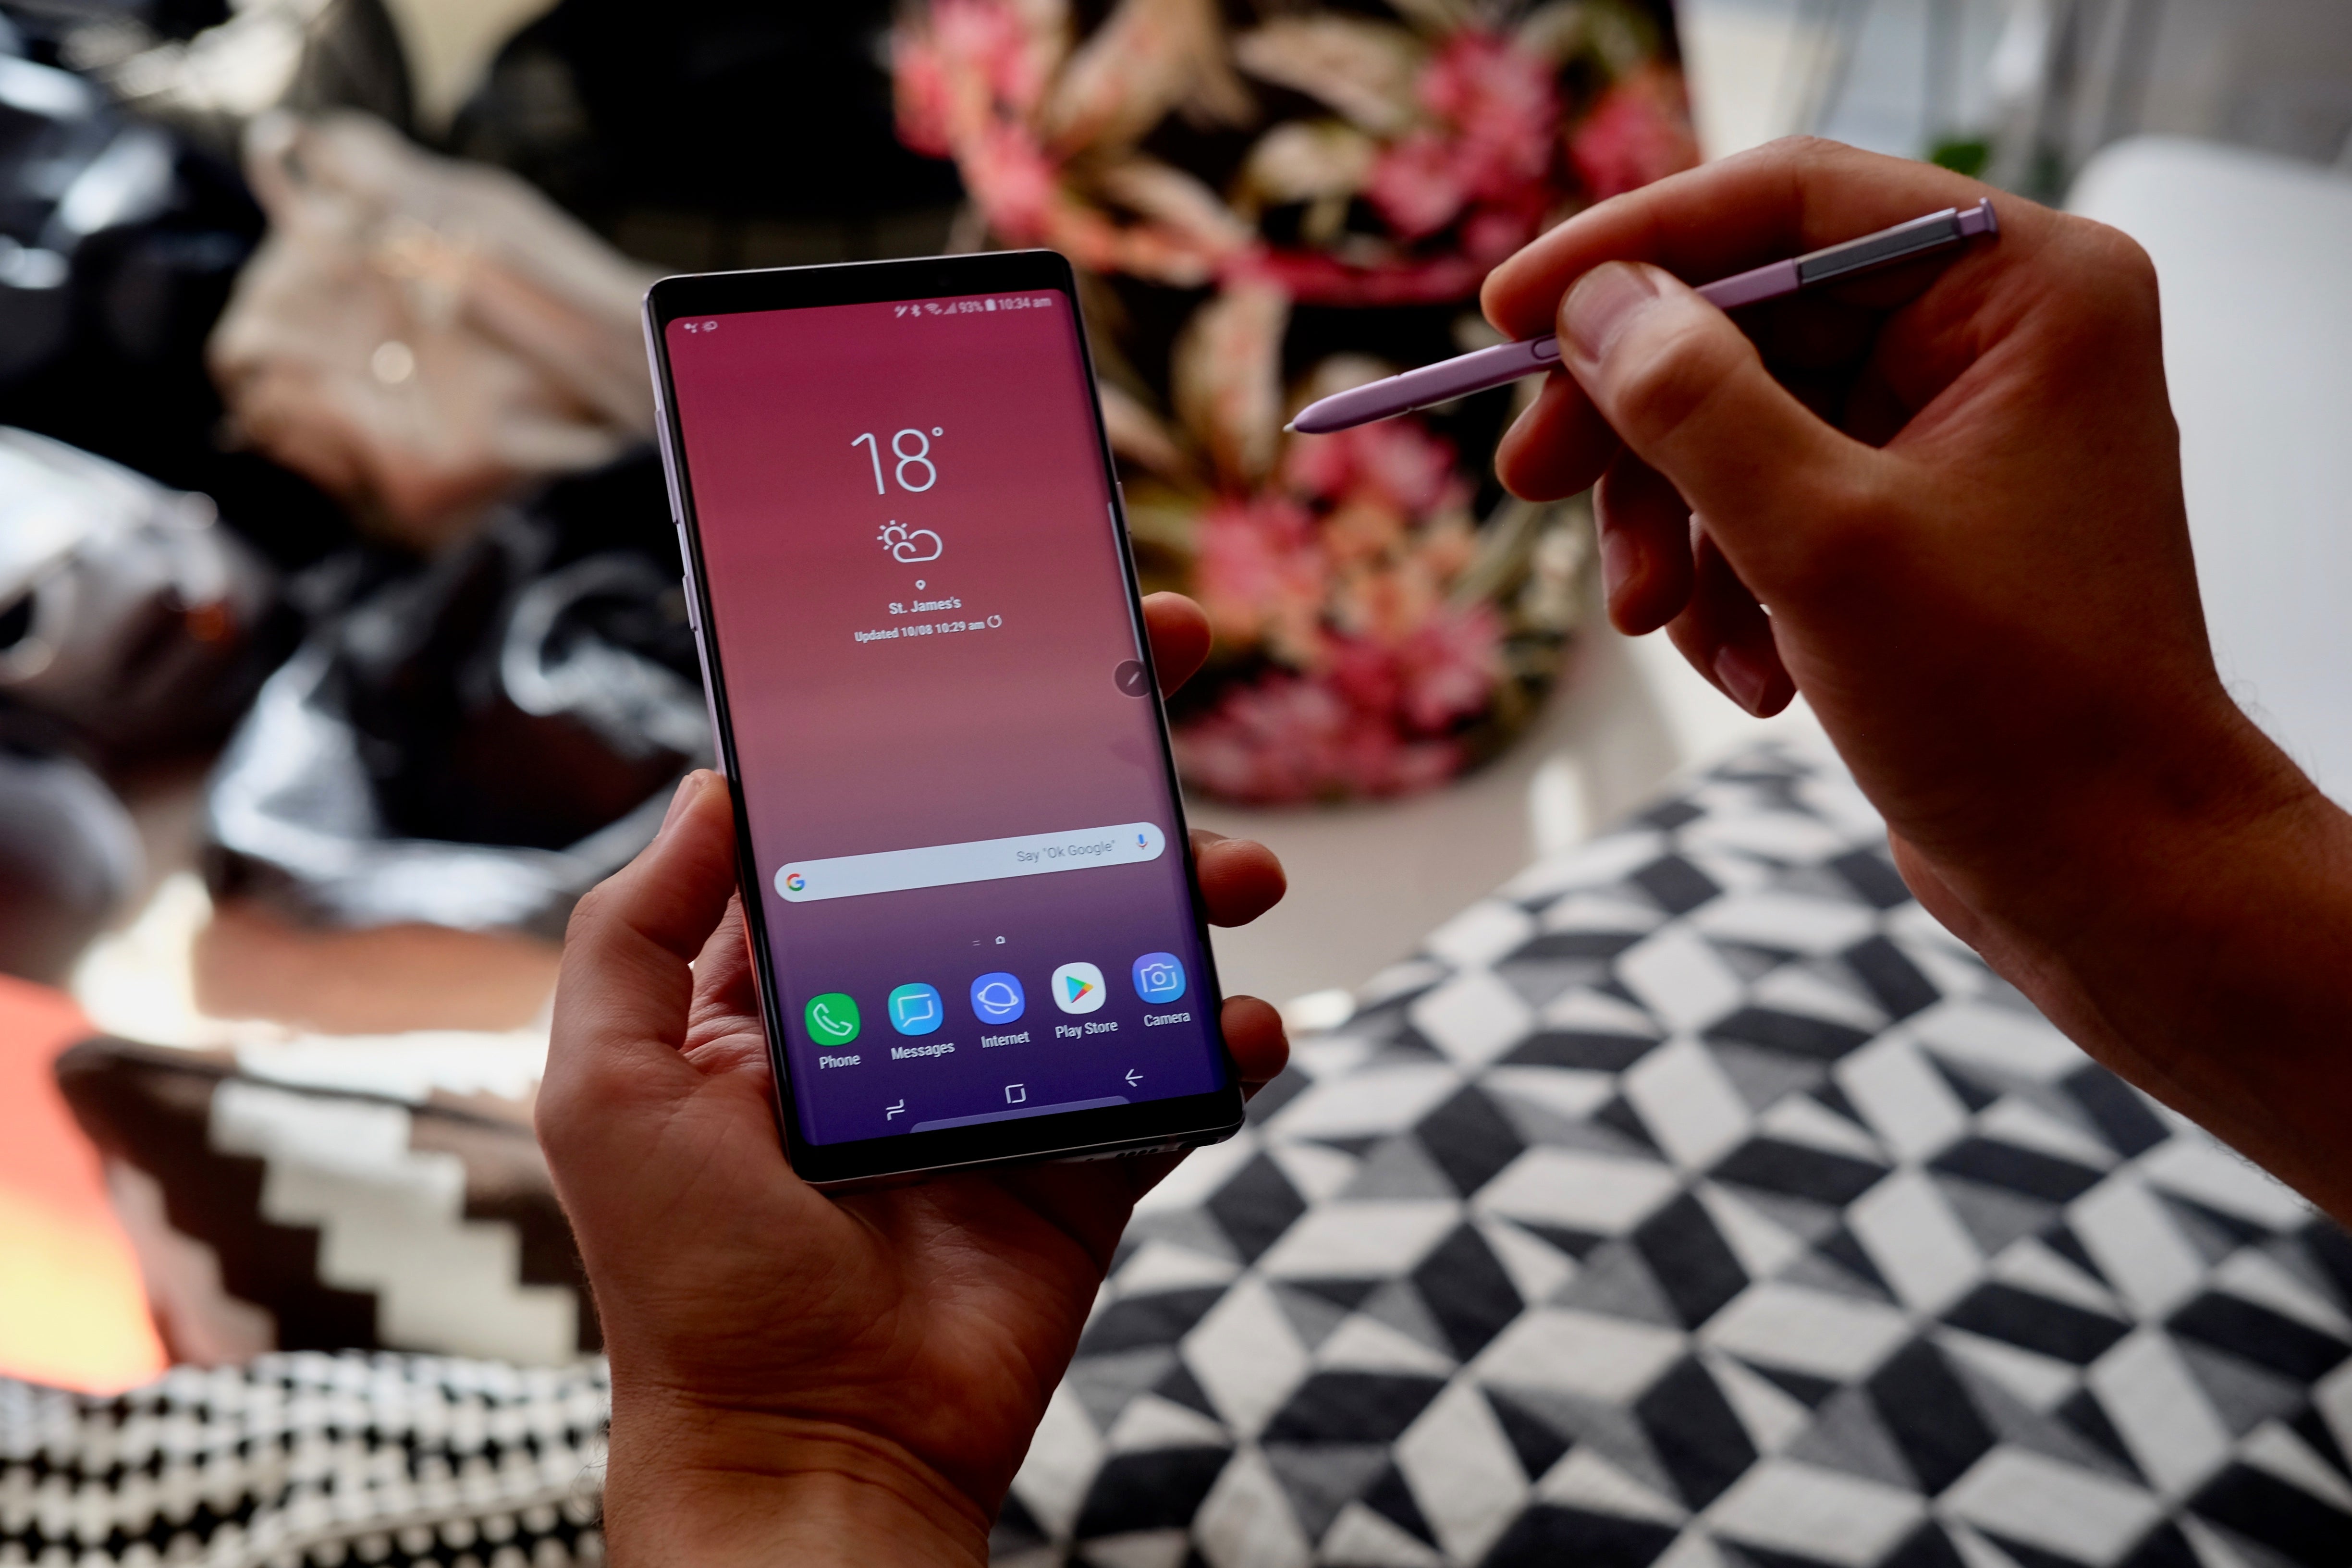 Here's how to download all of the official stock Galaxy Note 9 wallpapers